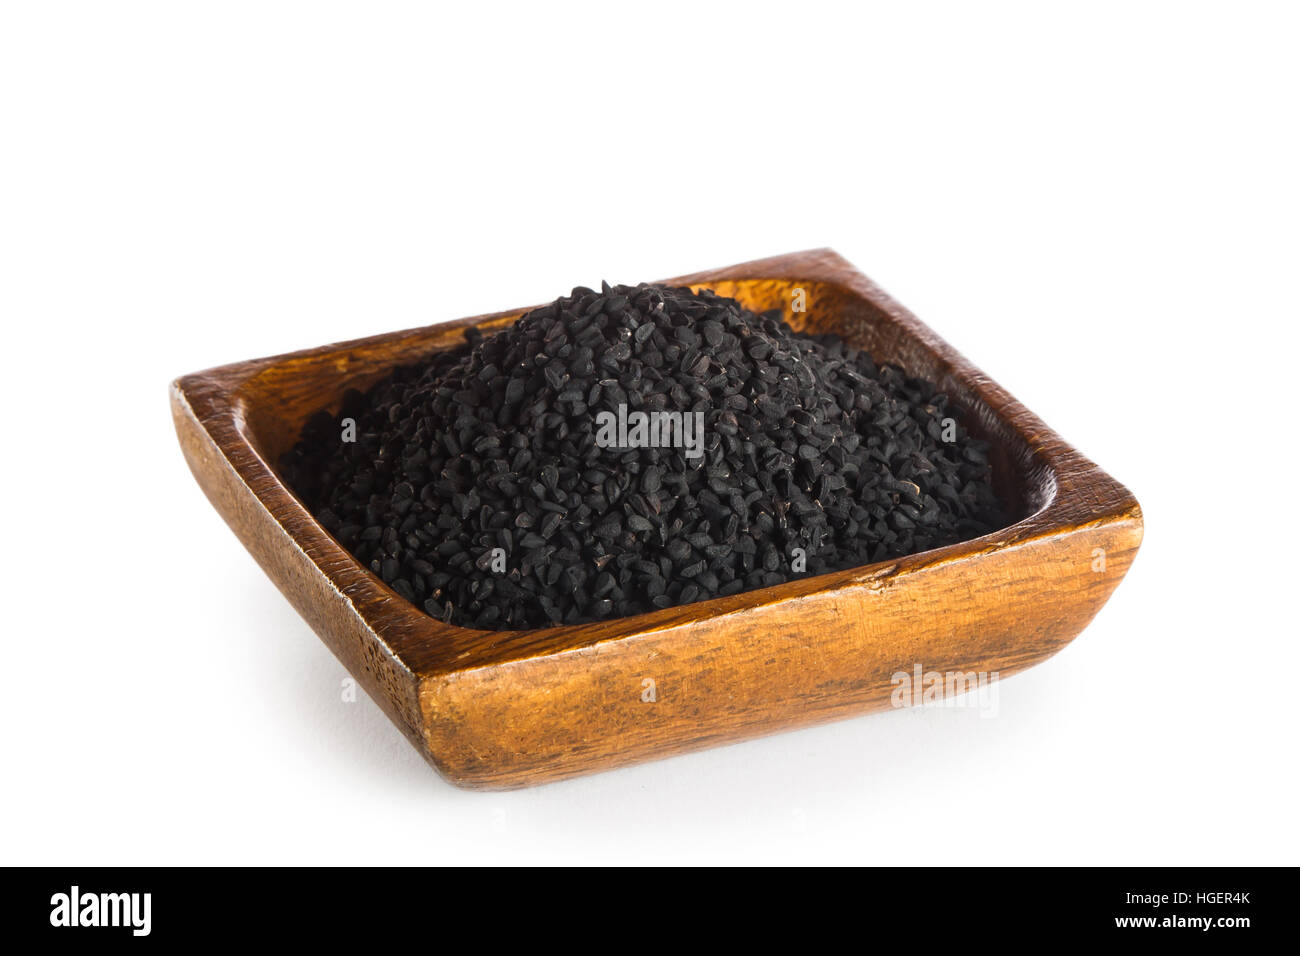 Nigella sativa seeds in wooden bowl isolated on white background Stock Photo